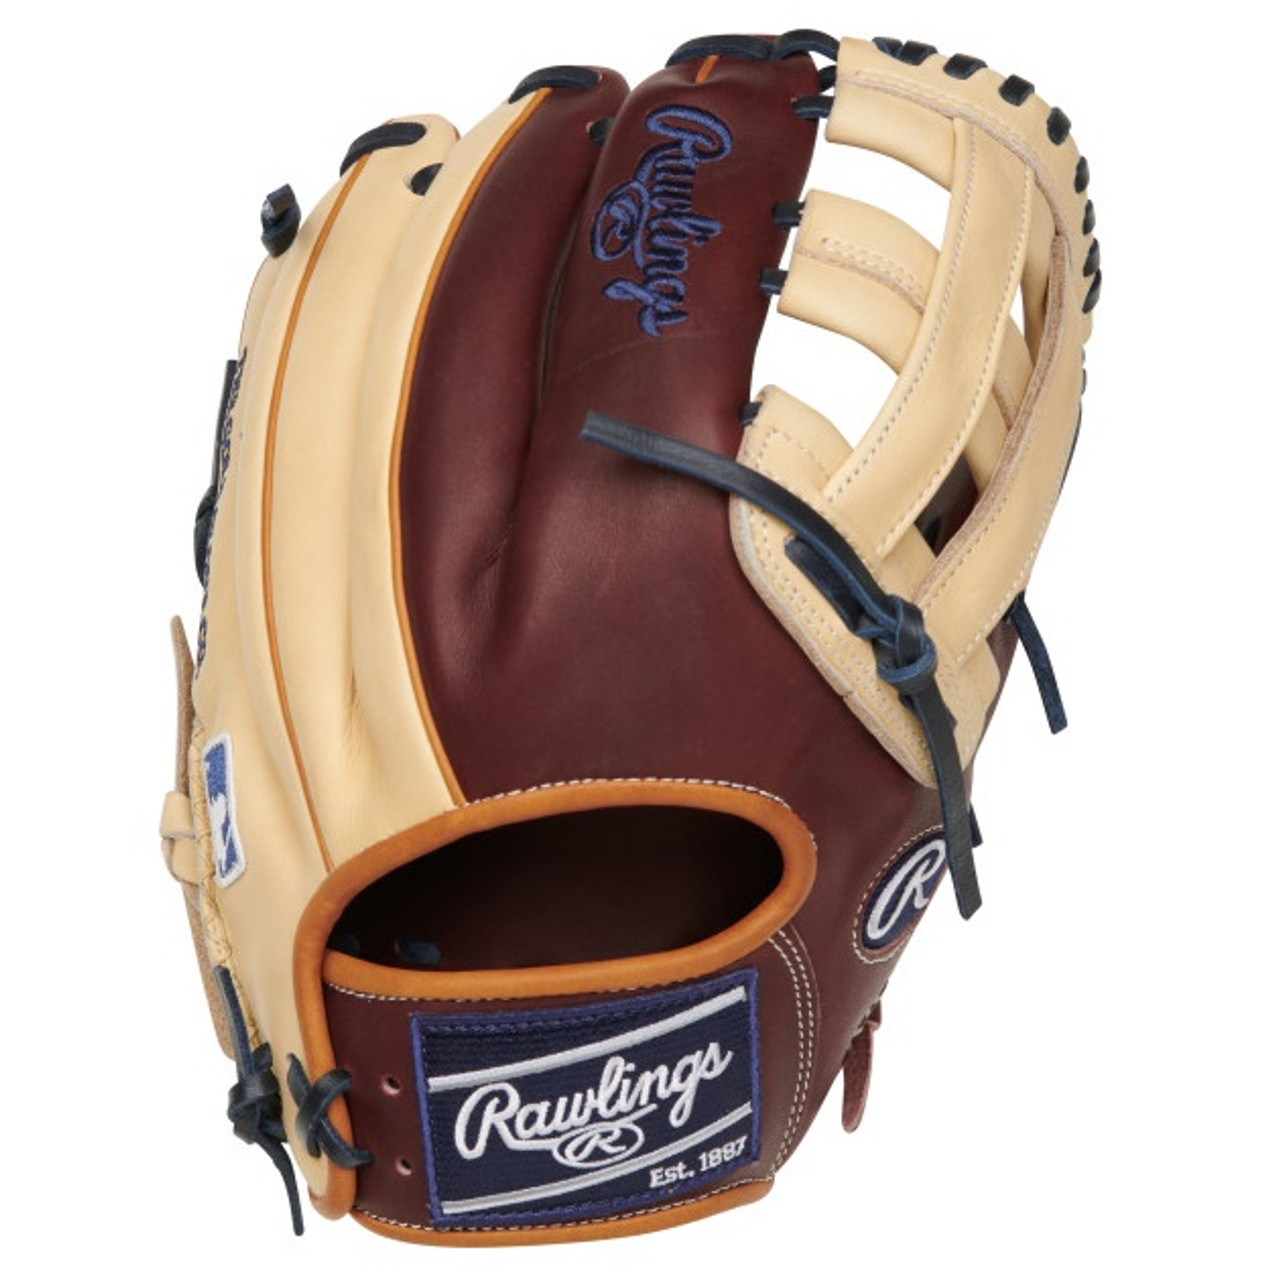 Rawlings Heart of the Hide Color Sync 7 Baseball Glove 12.25 KB17 H Web  Right Hand Throw - Ballgloves